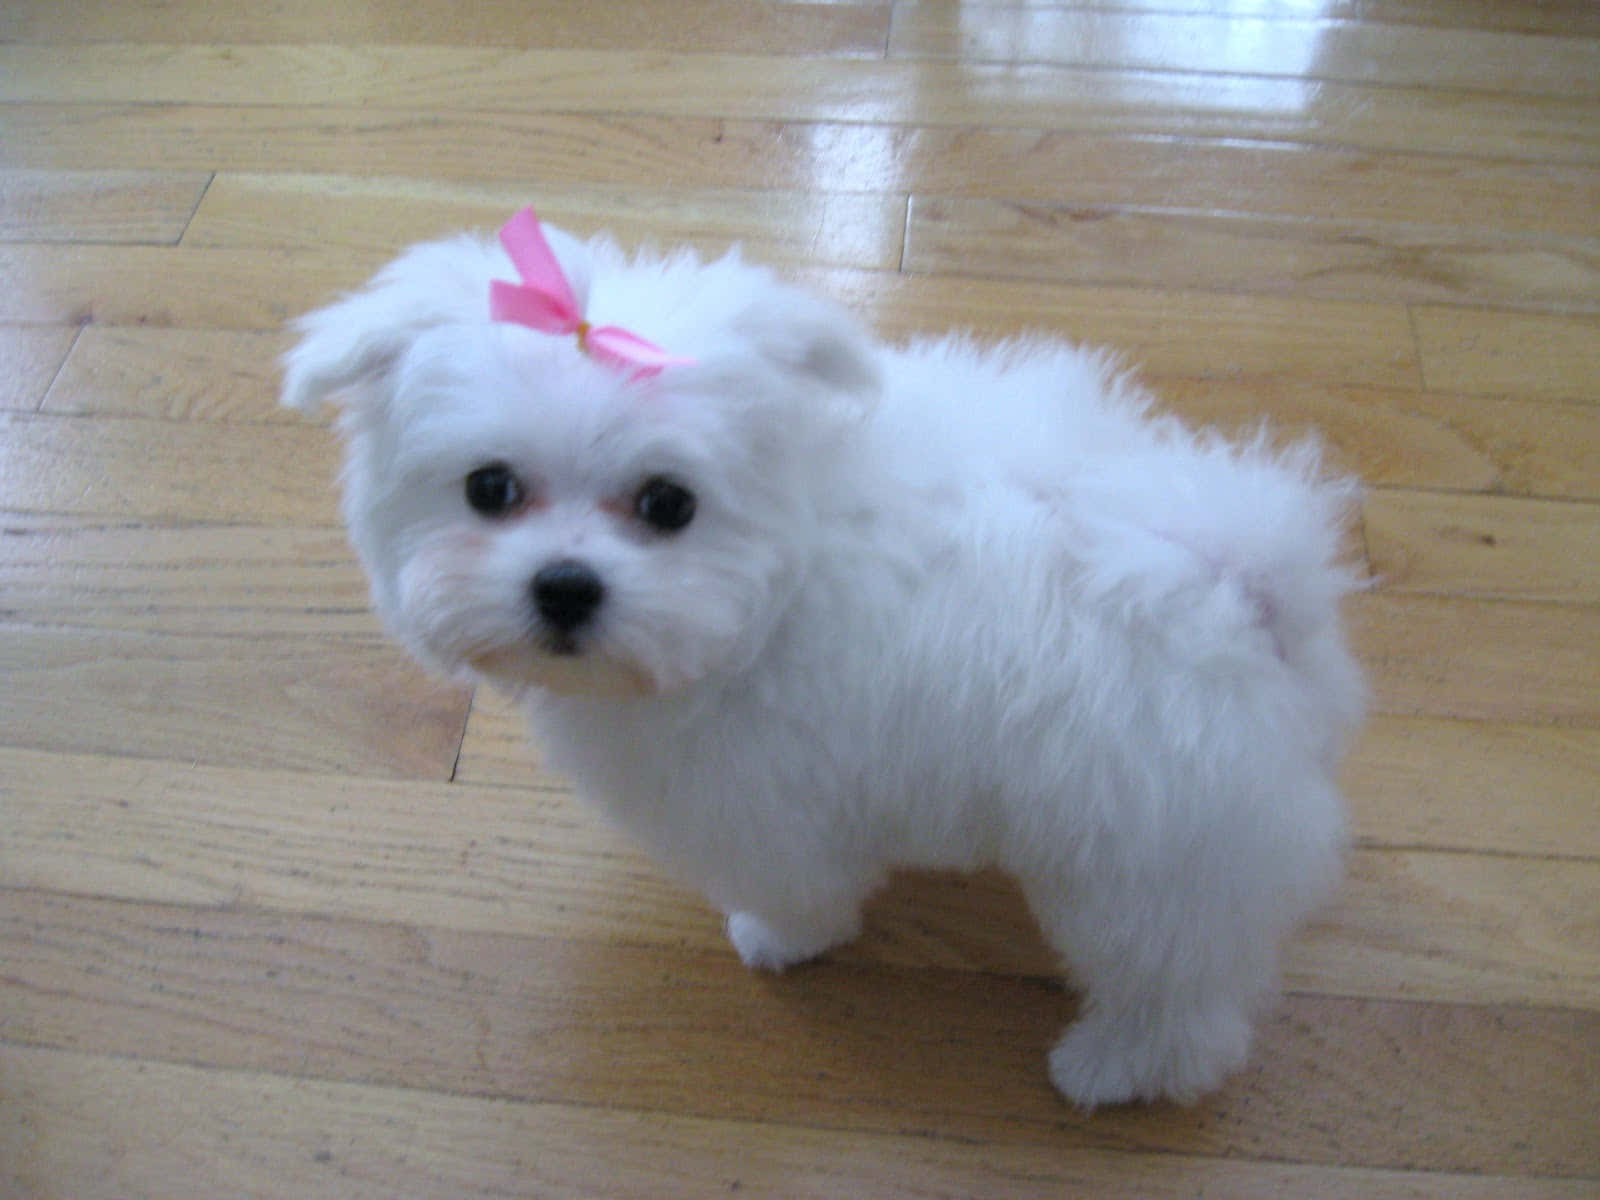 A White Dog With A Pink Bow On Its Head